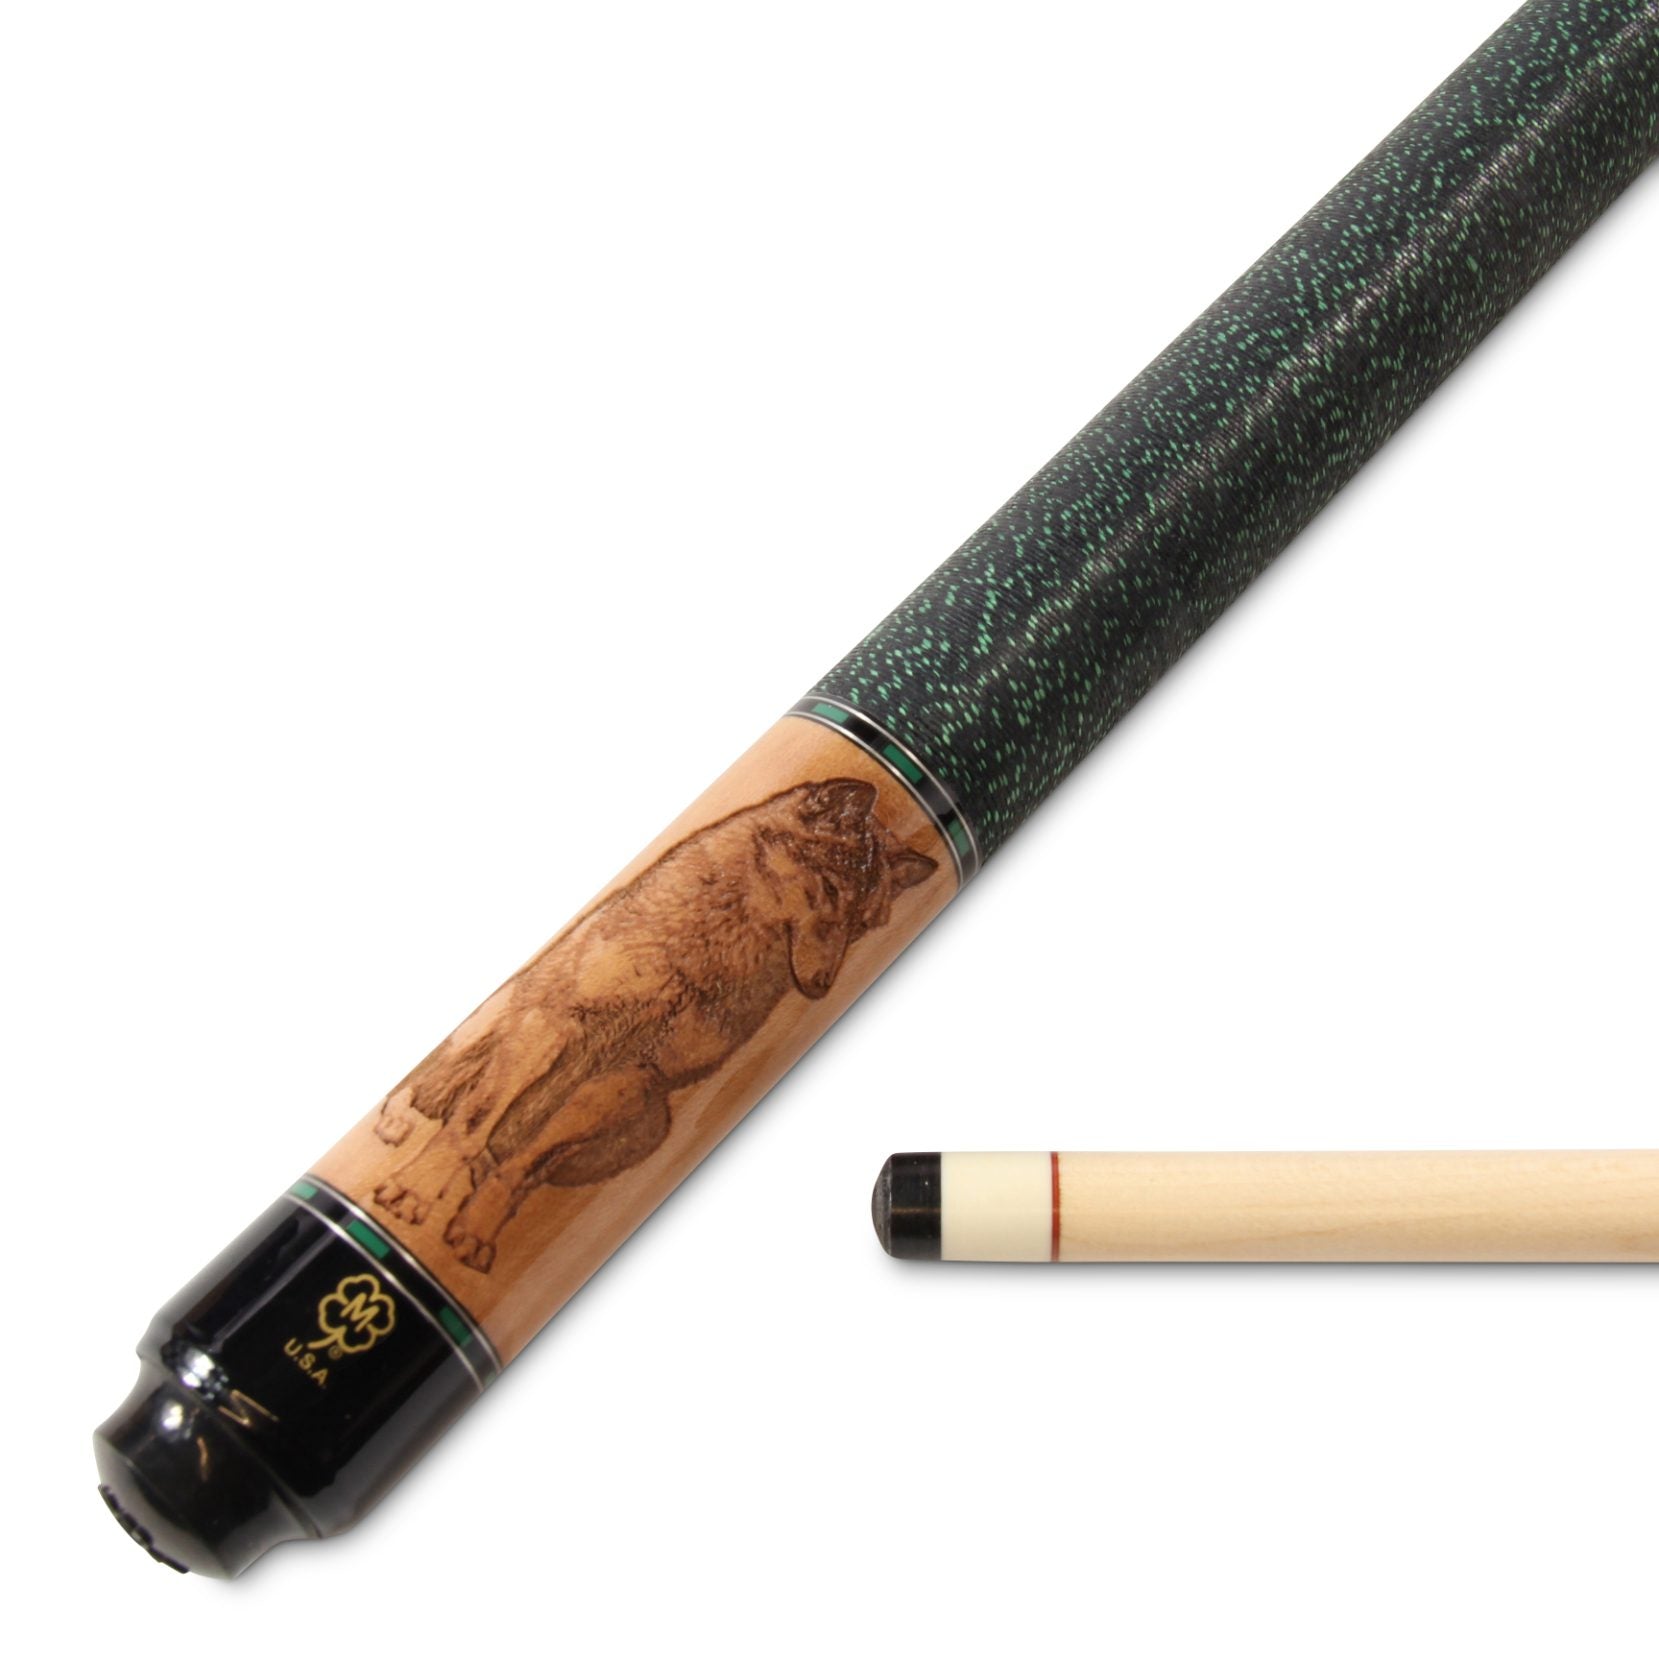 McDermott GREAT WOLF Hand Crafted G-Series American Pool Cue 13mm tip –G338